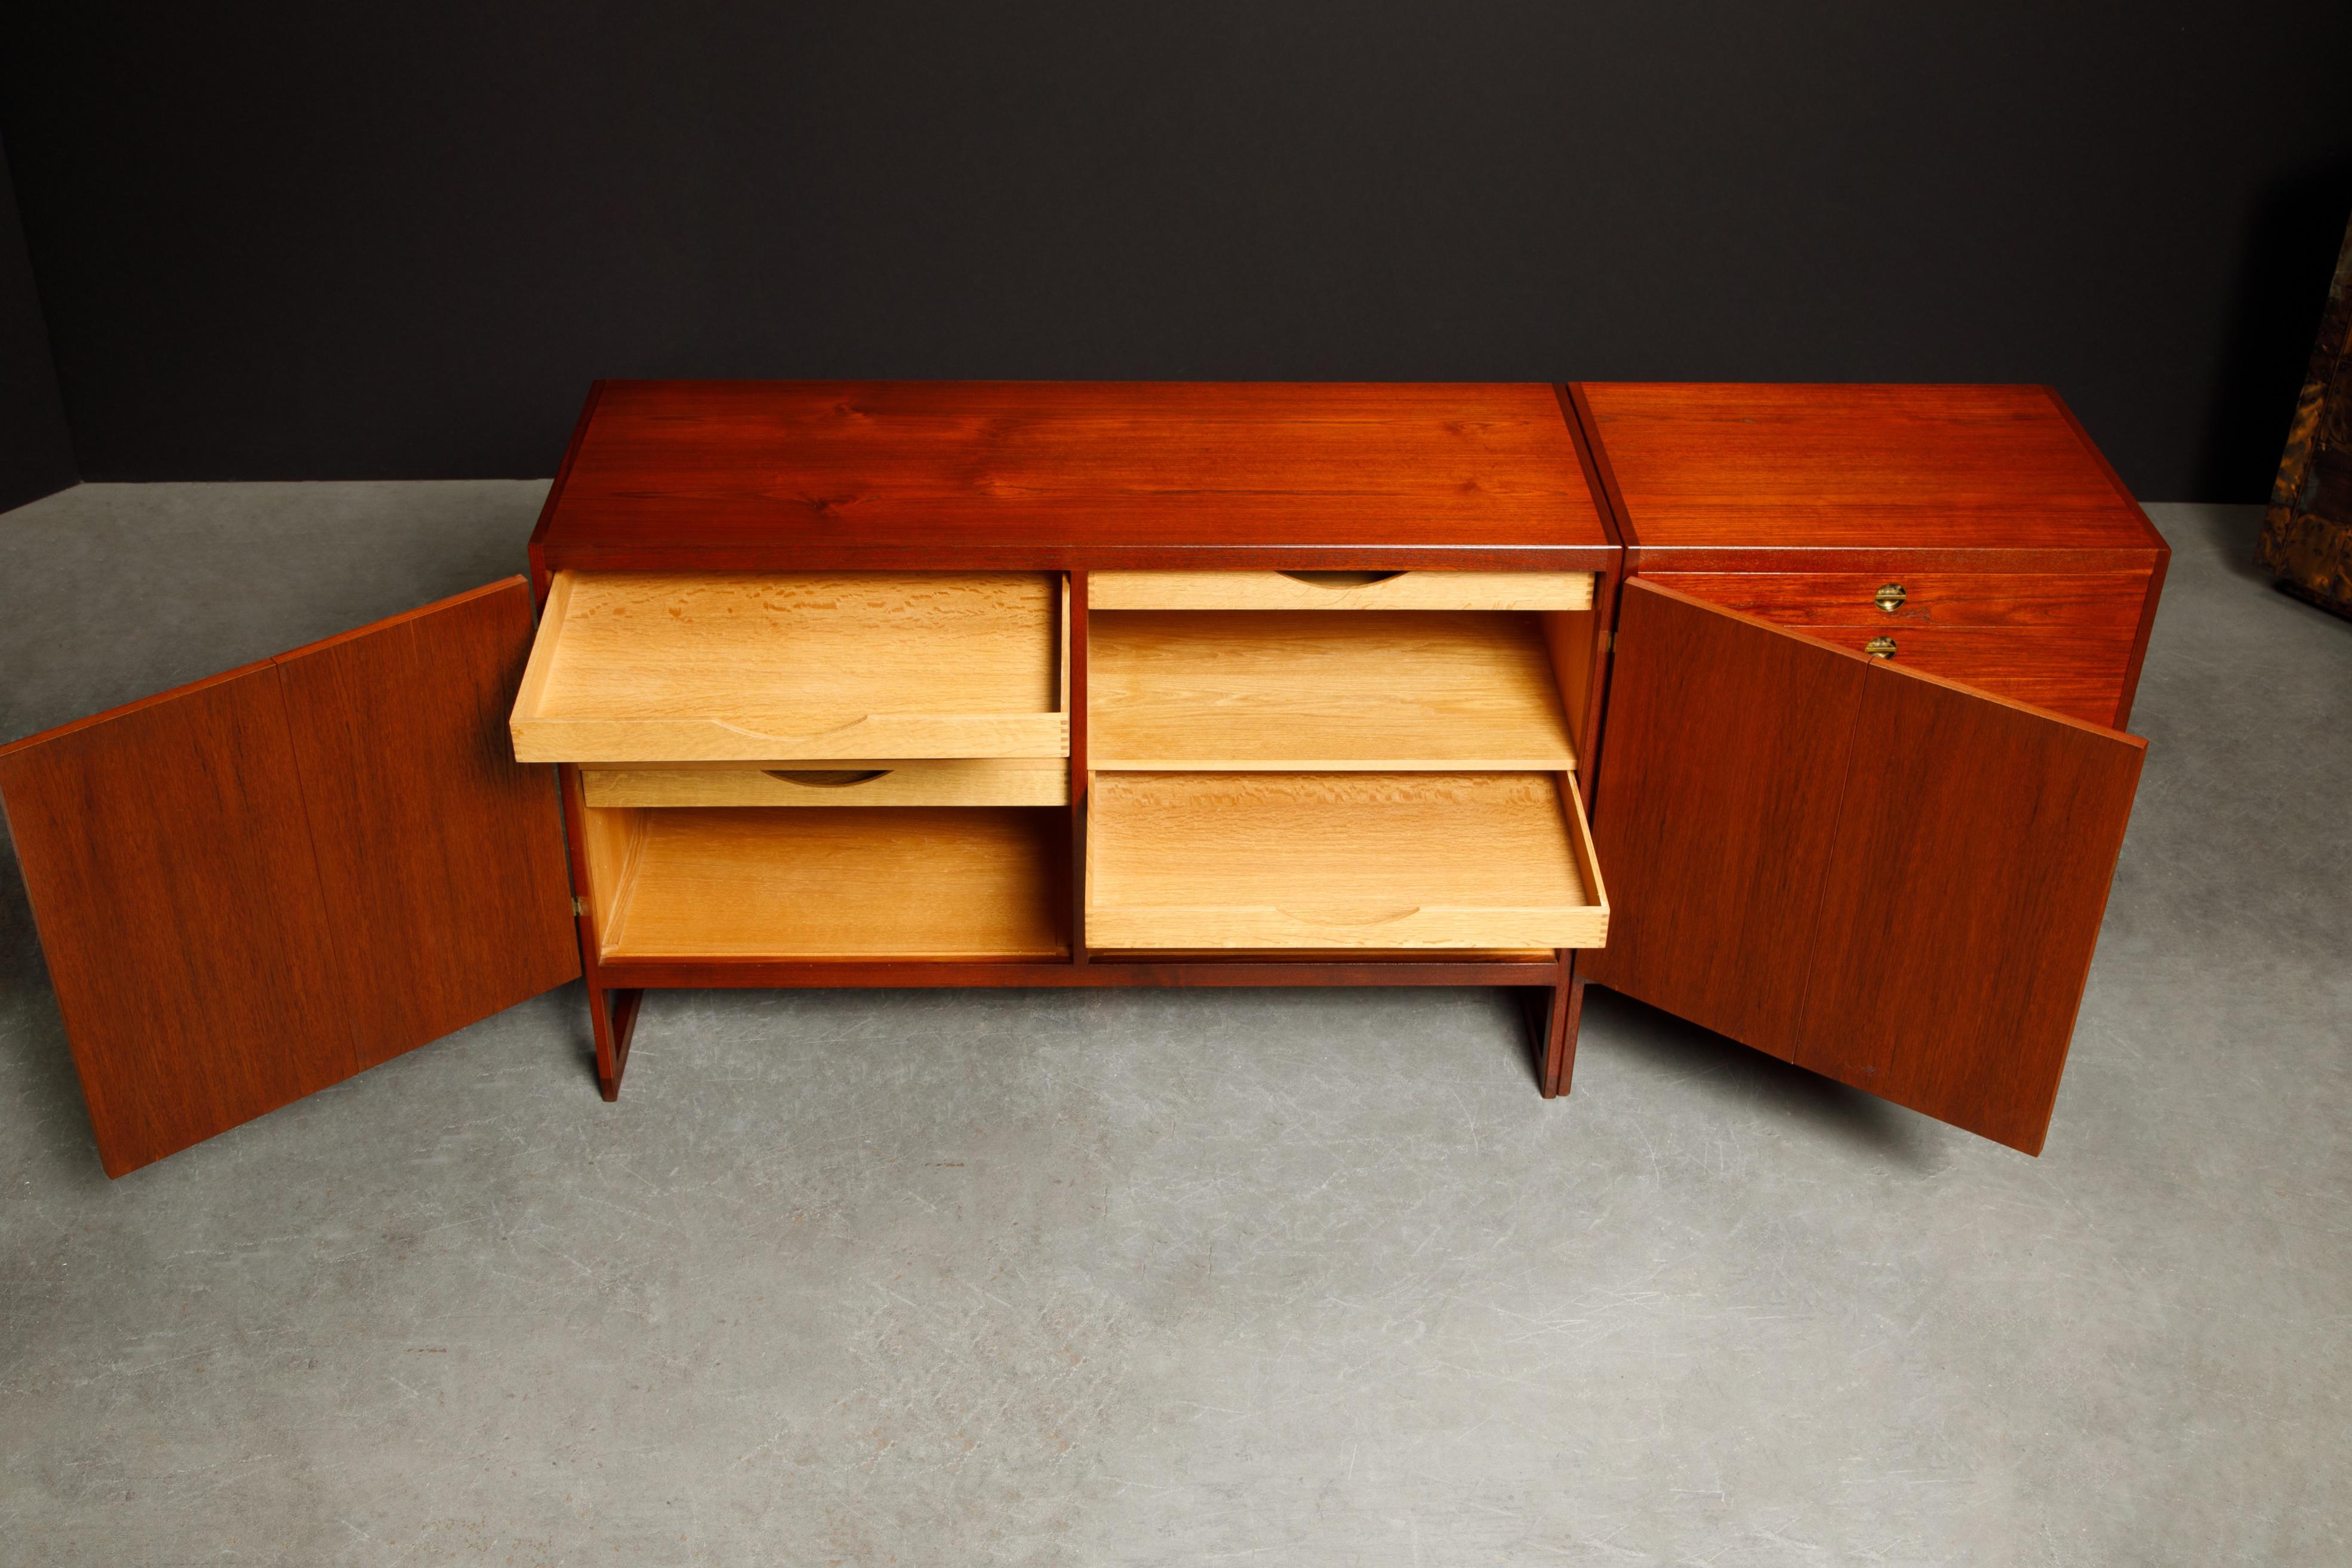 Mid-20th Century Børge Mogensen for P. Lauritsen & Son Sideboard Cabinets, 1950s Denmark, Signed For Sale